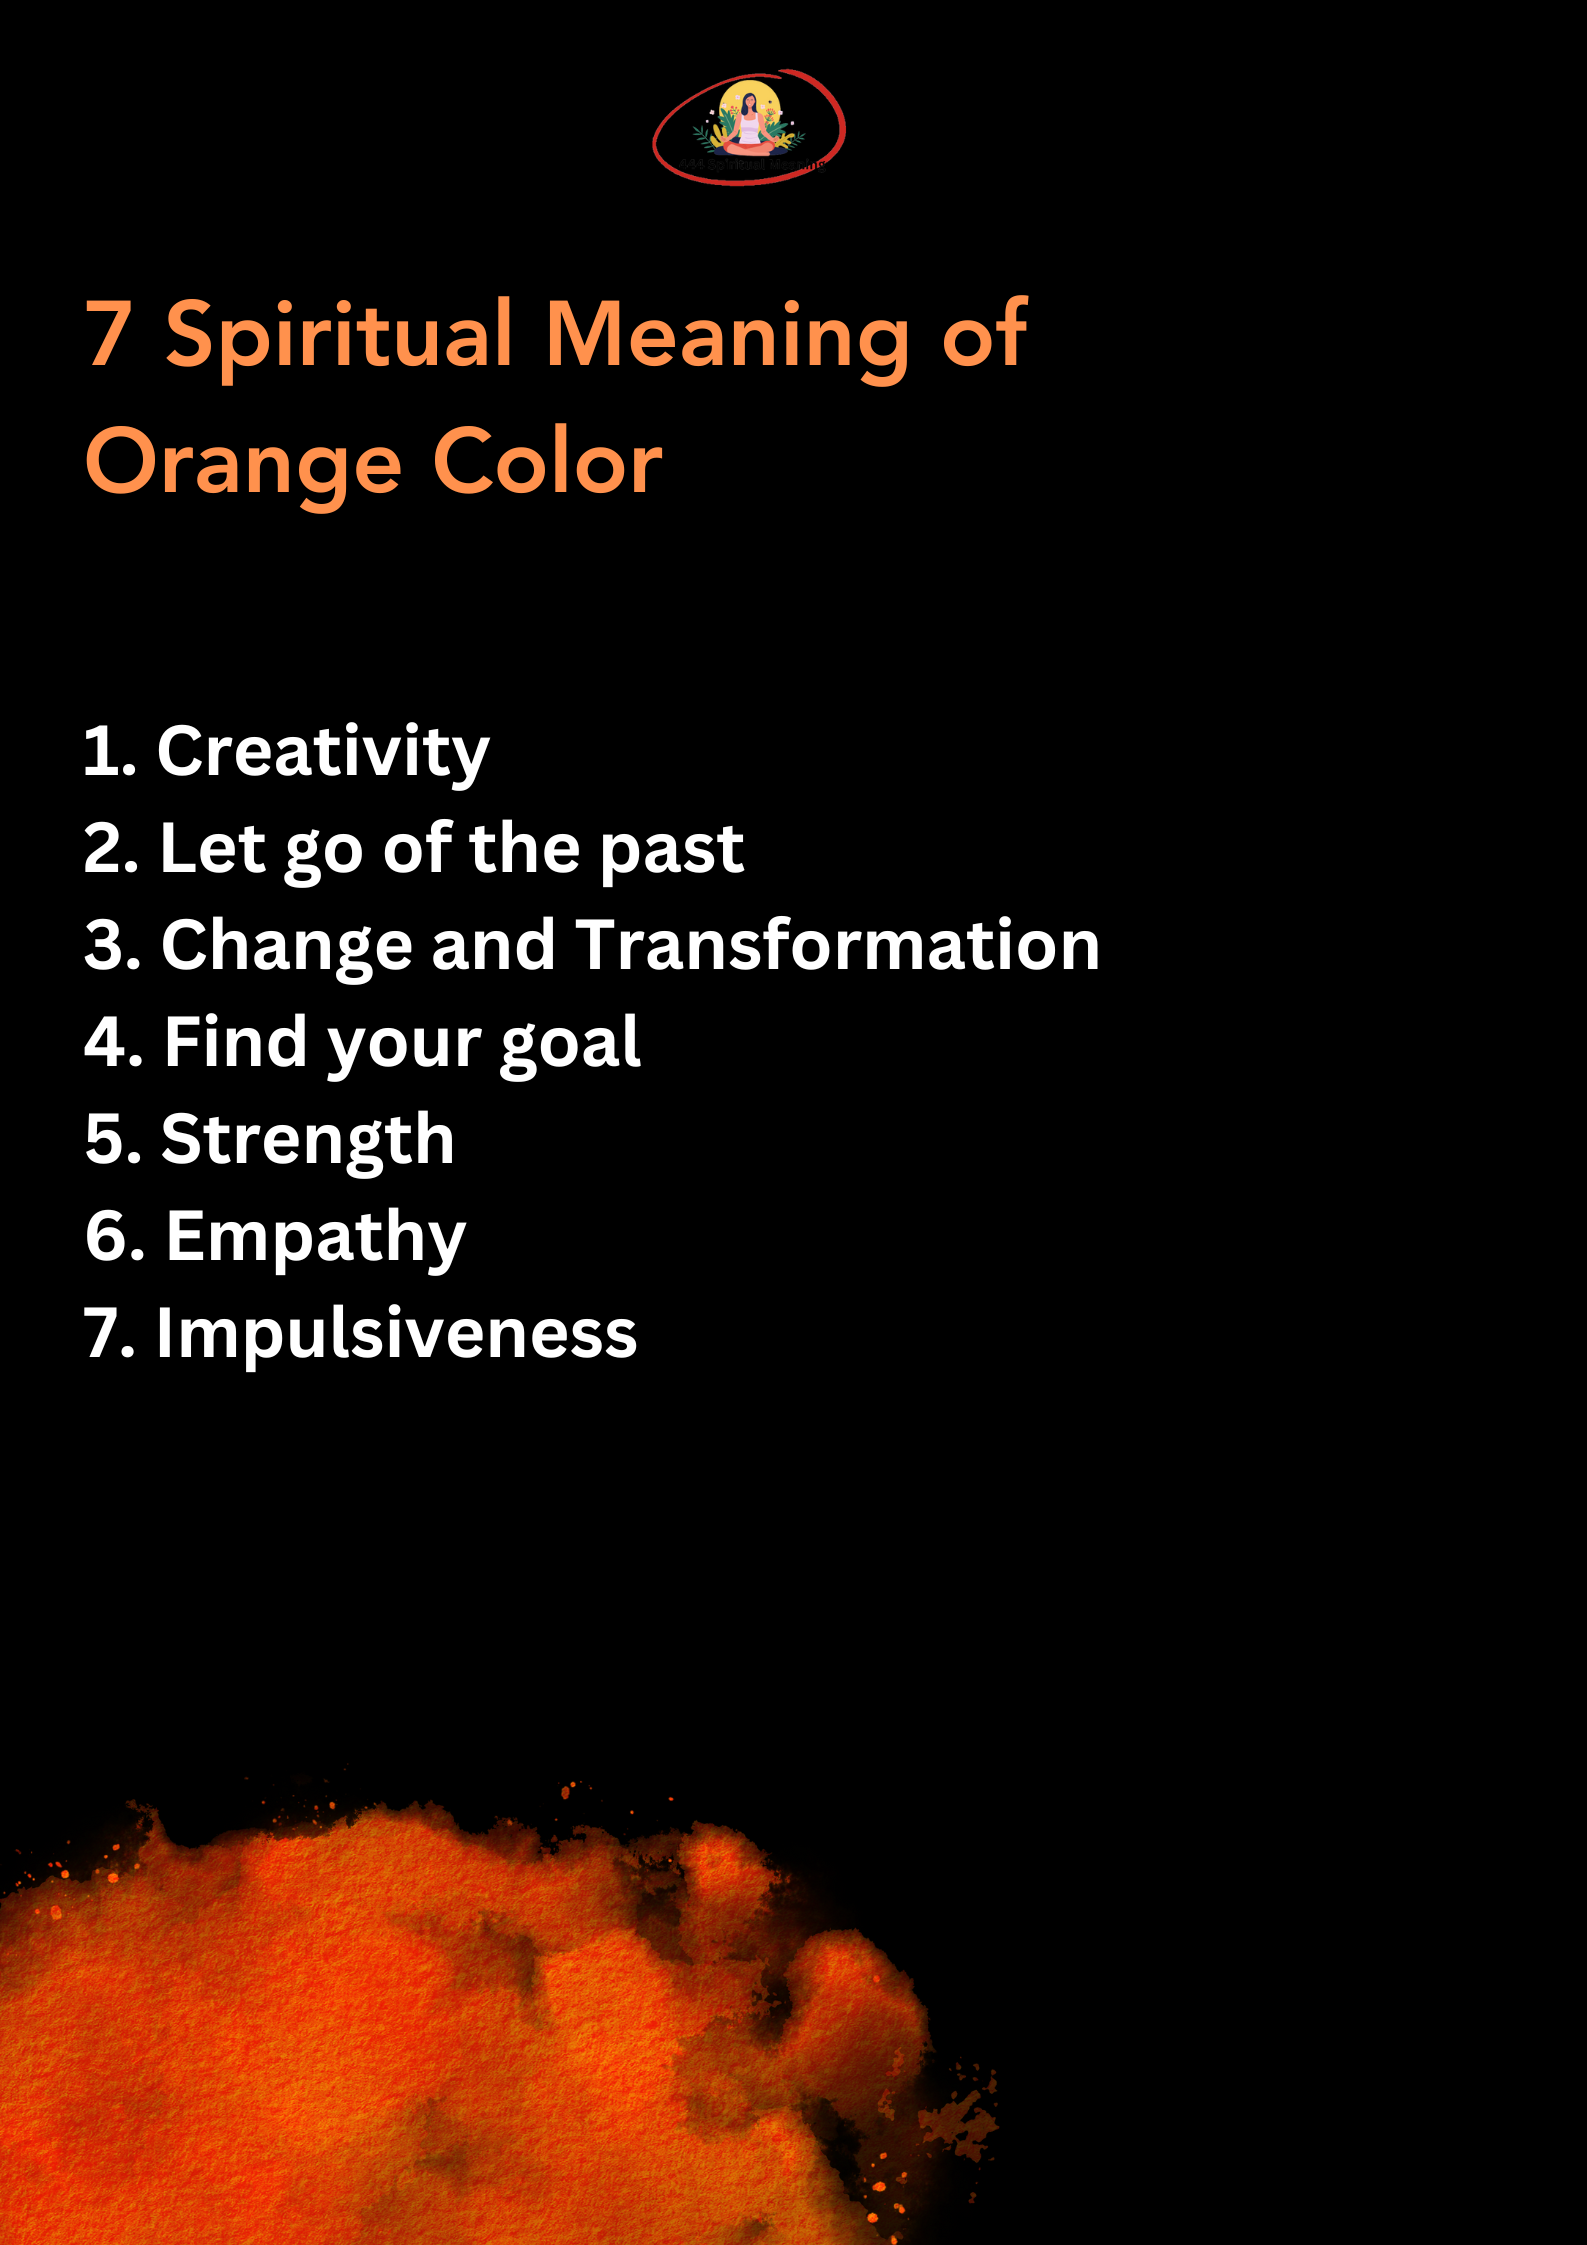 7 Spiritual Meaning of Orange Color